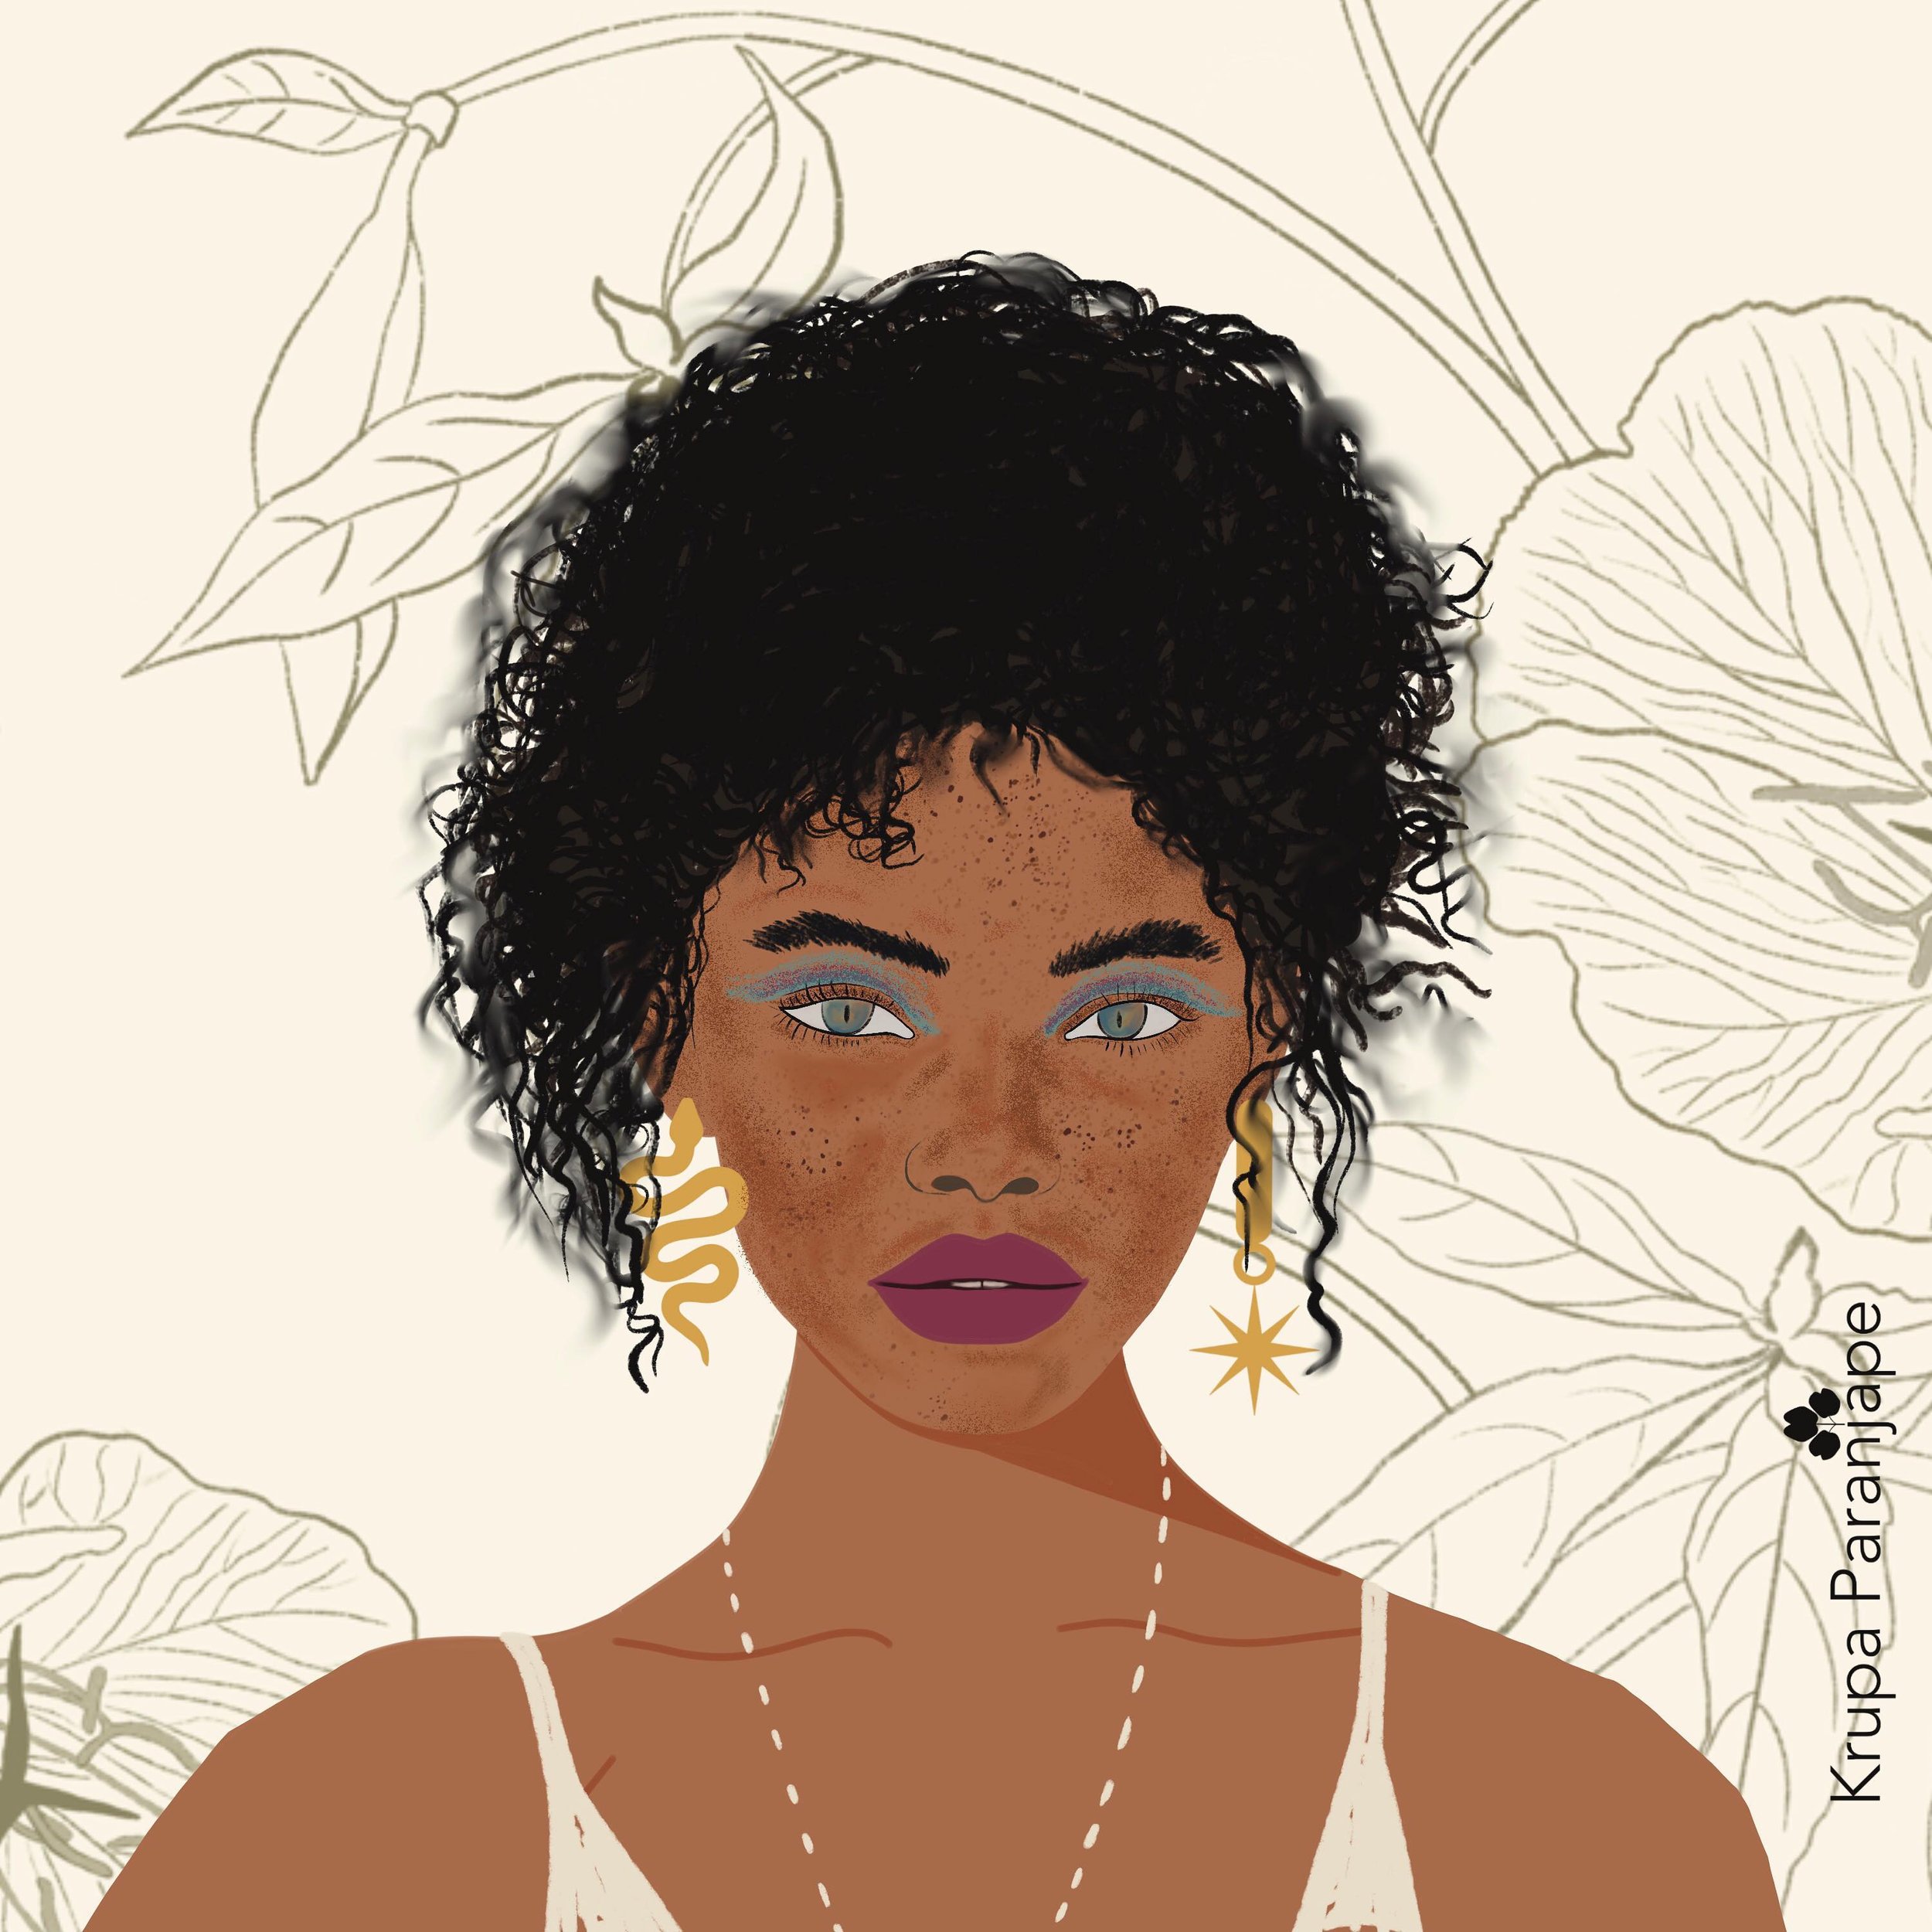 Day 4 of #portraitparty hosted by @charlyclements 

Prompt : Afro, Magical and Eye Shadow

#portrait #magical #portraitdrawing #charlyclements #drawthisinyourstyle #portraitdrawingchallenge